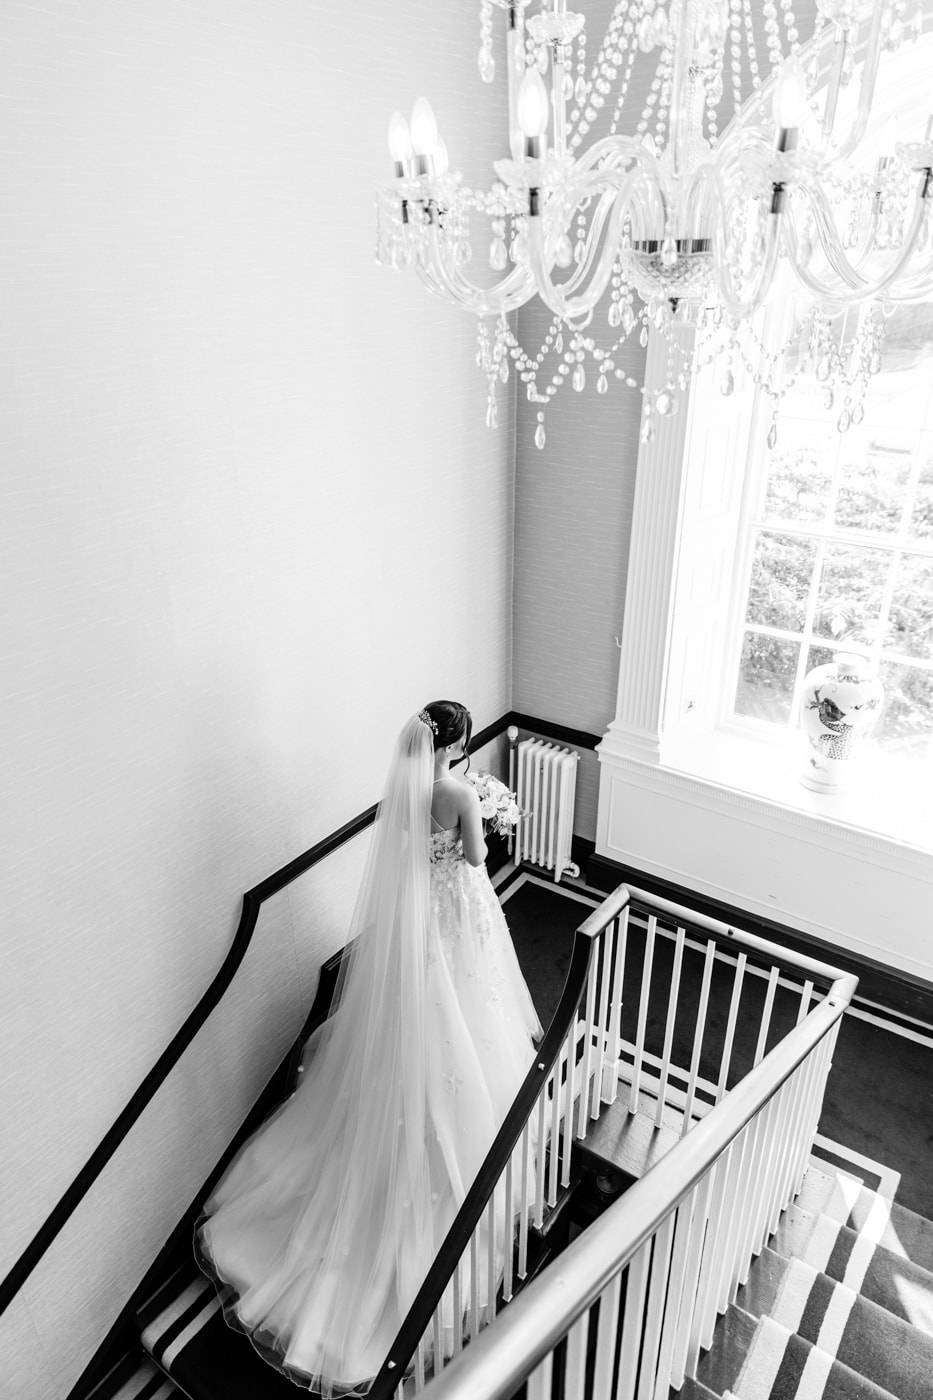 Staircase at Mottram Hall is good for bridal portraits